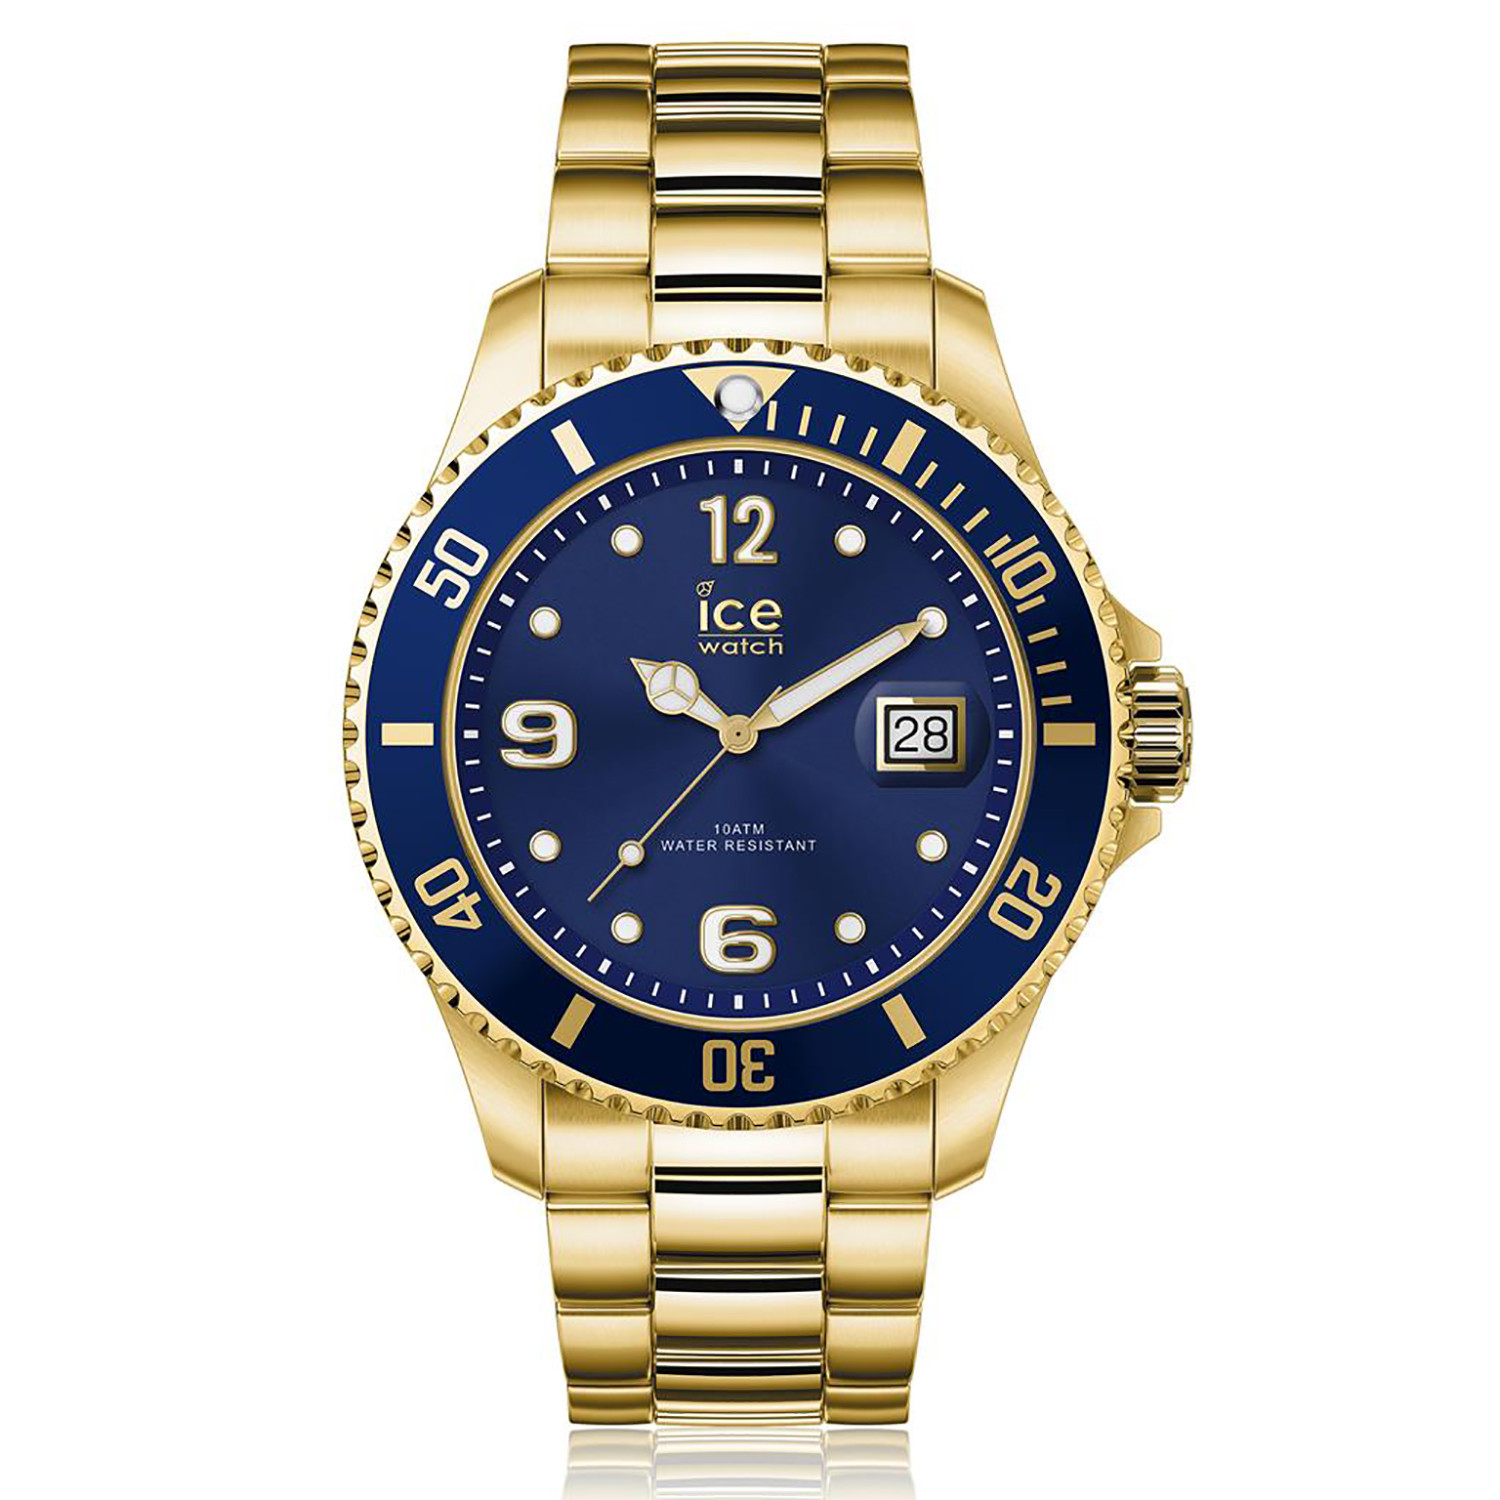 Montre Ice Watch steel Gold blue extra large